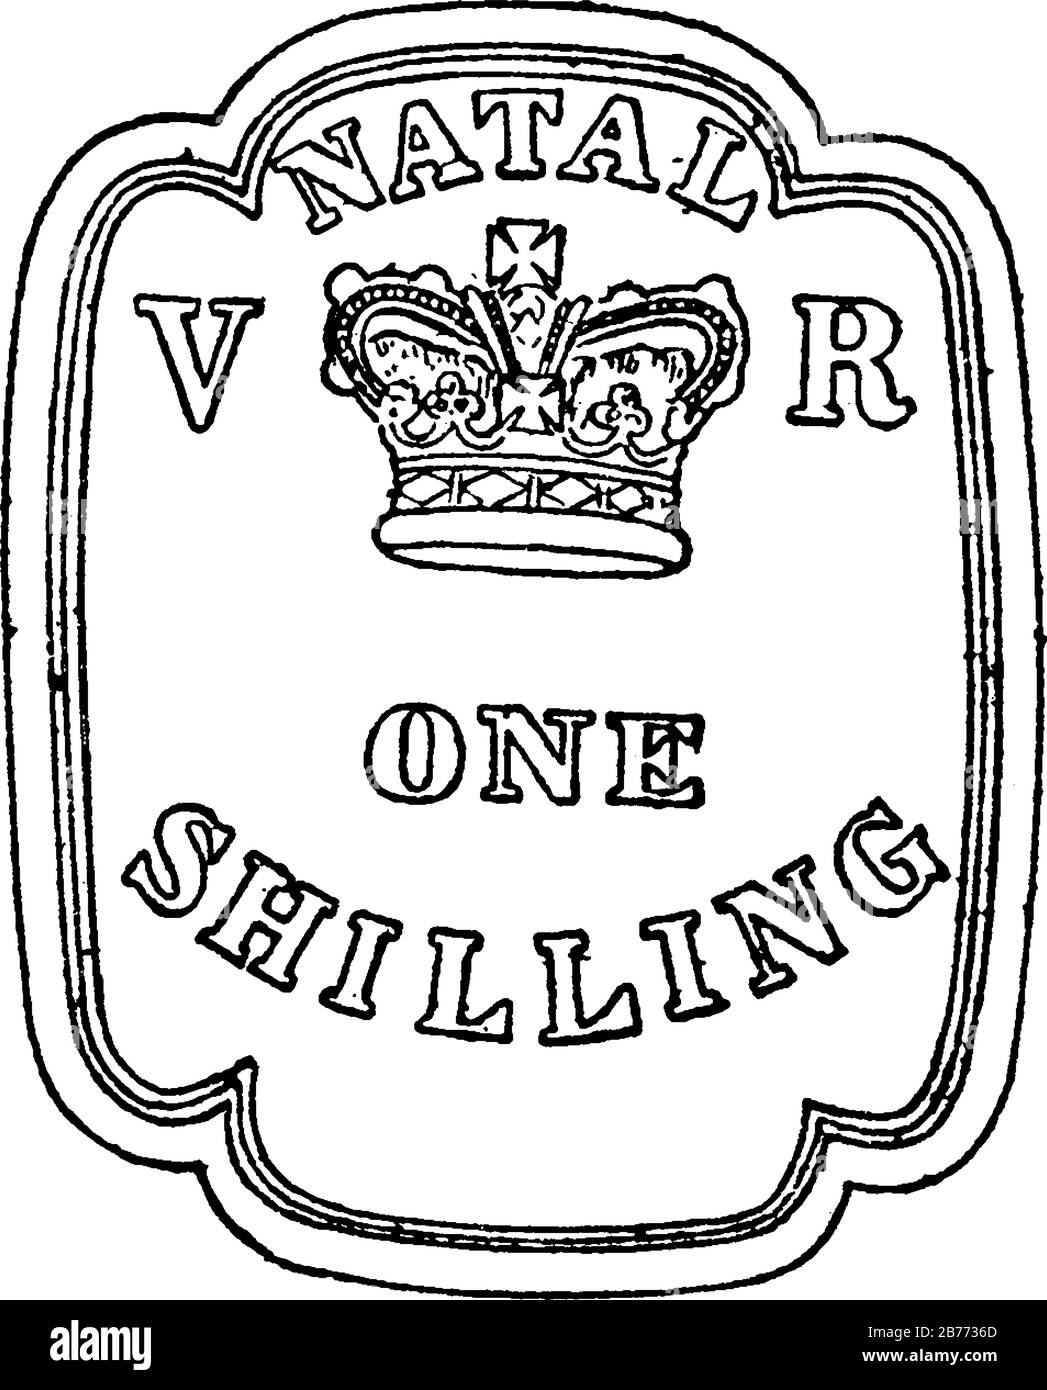 Natal Stamp (1 shilling) from 1857, a small adhesive piece of paper stuck to something to show an amount of money paid, mainly a postage stamp, vintag Stock Vector